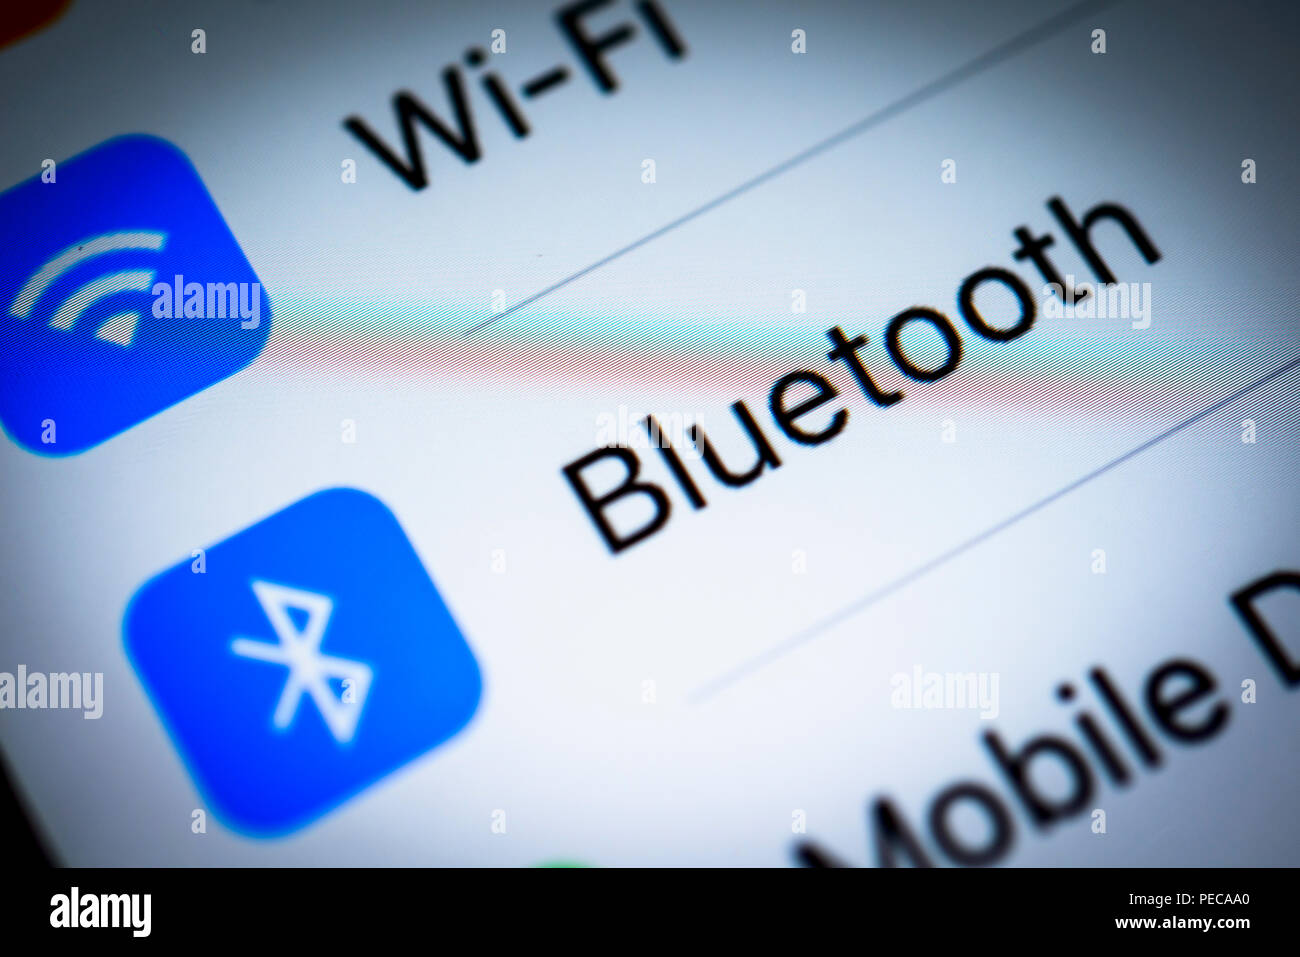 Bluetooth settings displayed on an iPhone, iOS, smartphone, display, close-up, detail, Germany Stock Photo